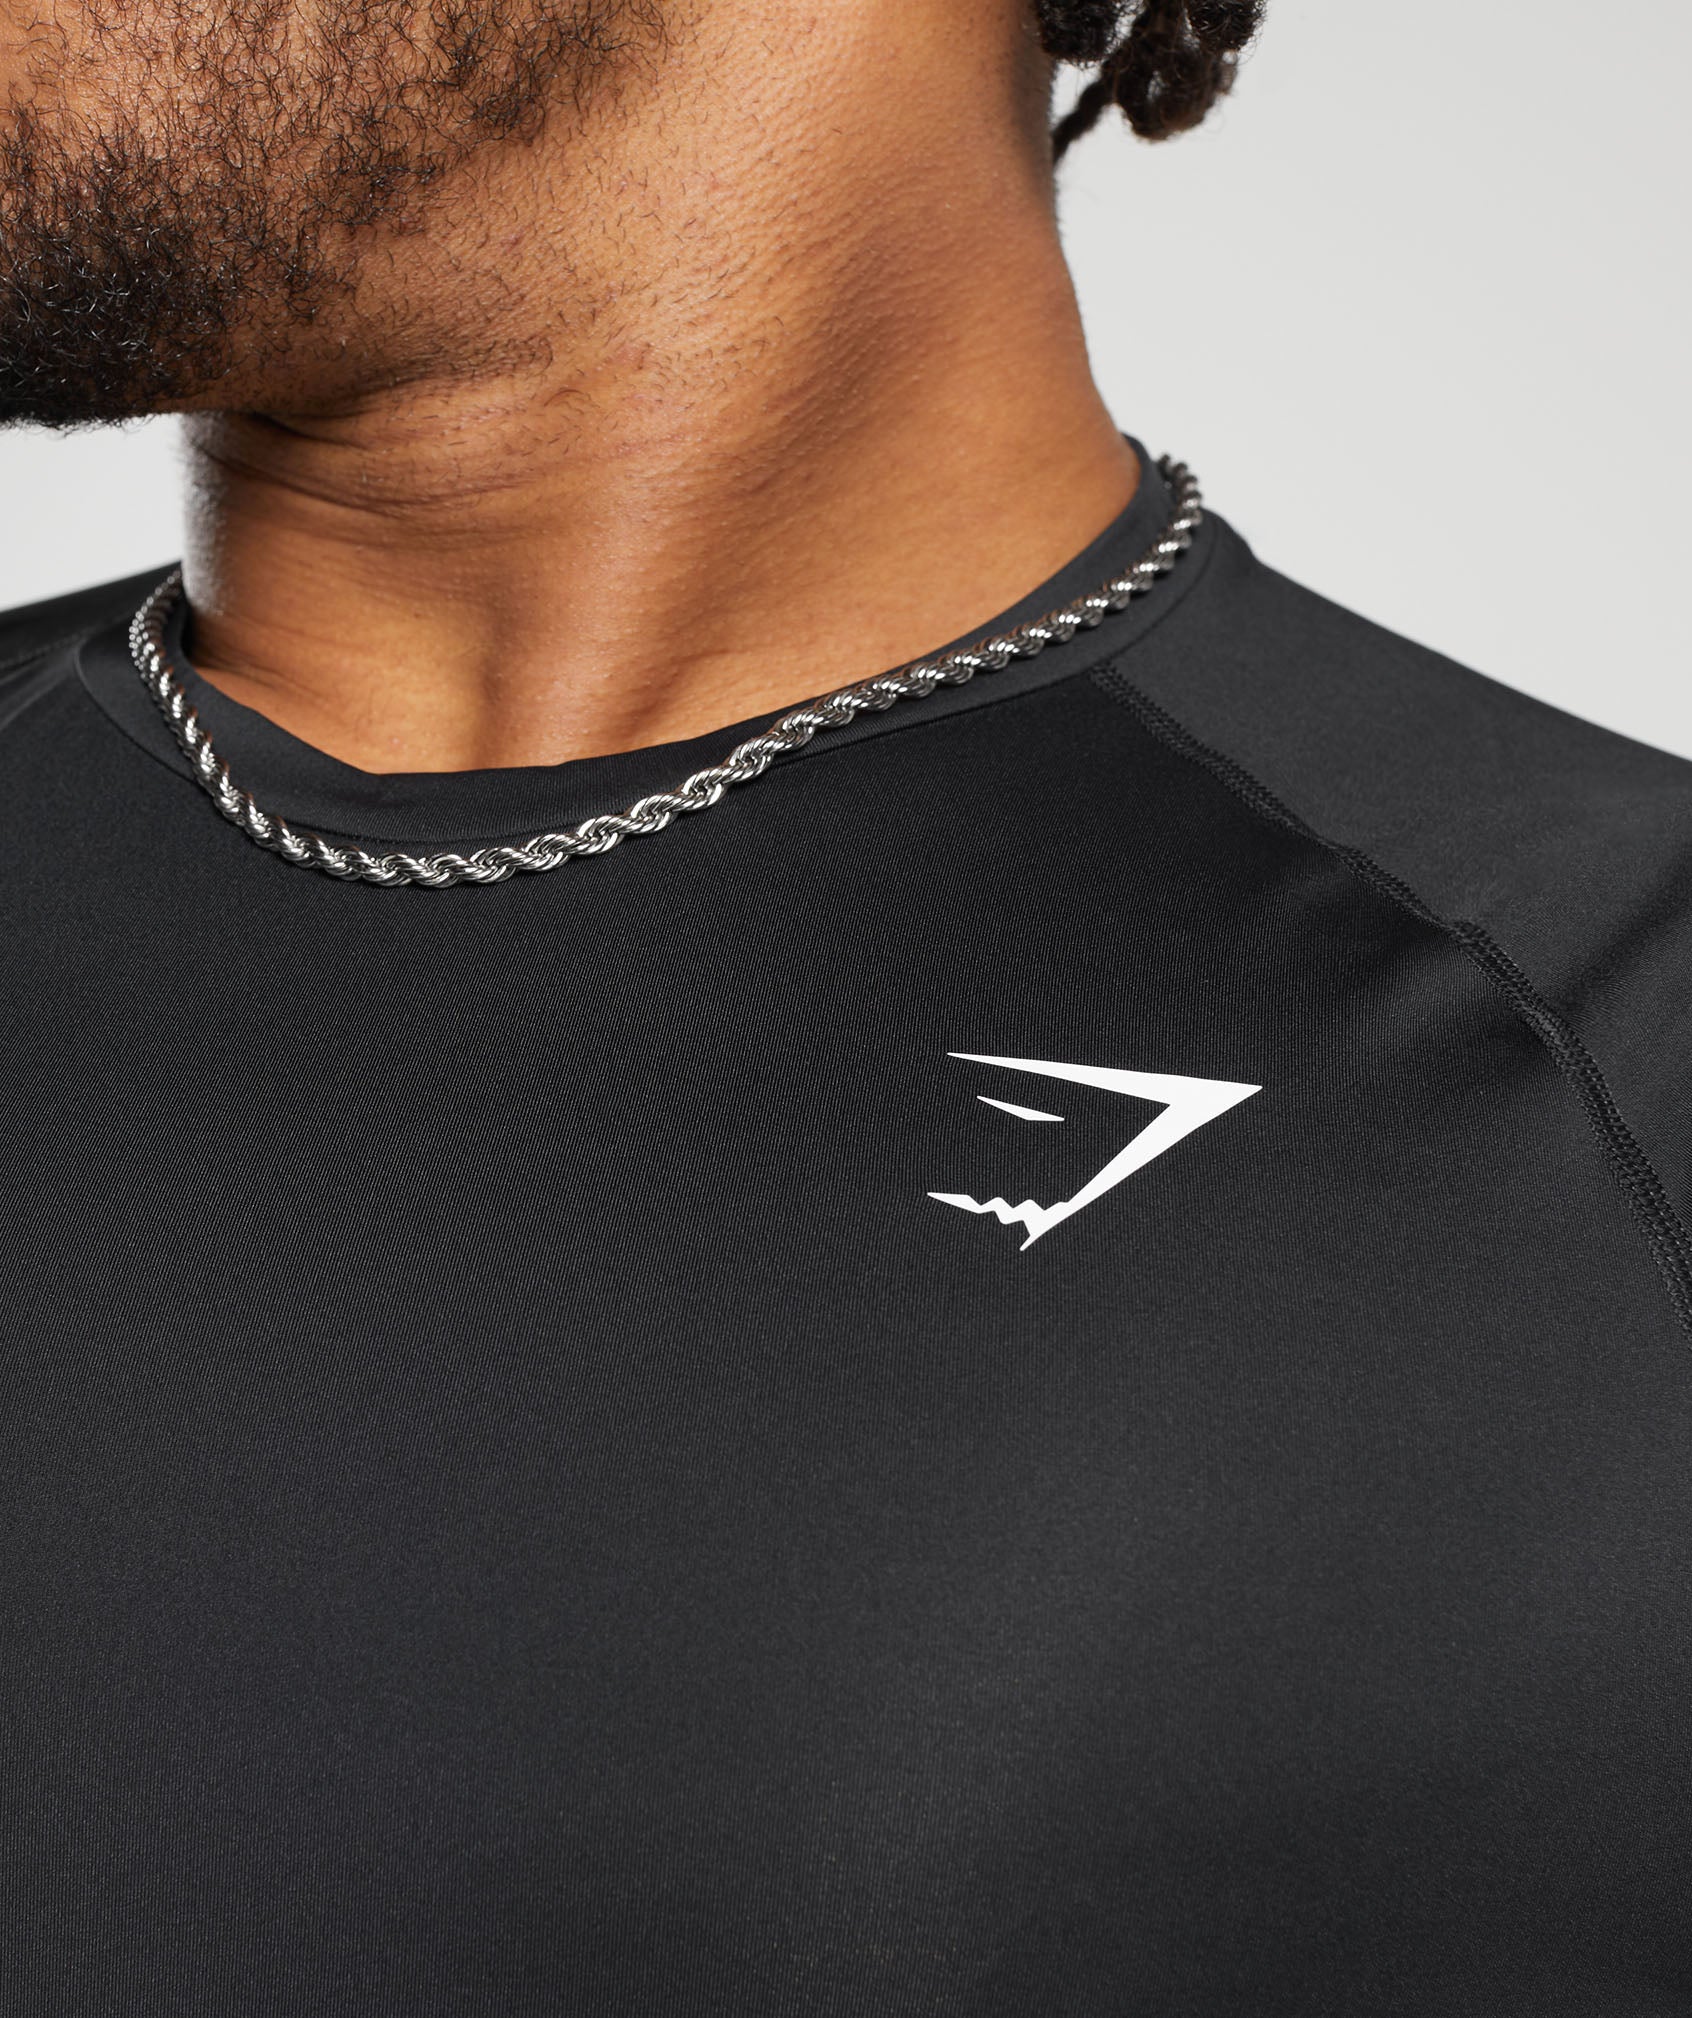 Element Baselayer Long Sleeve T-Shirt in Black - view 5